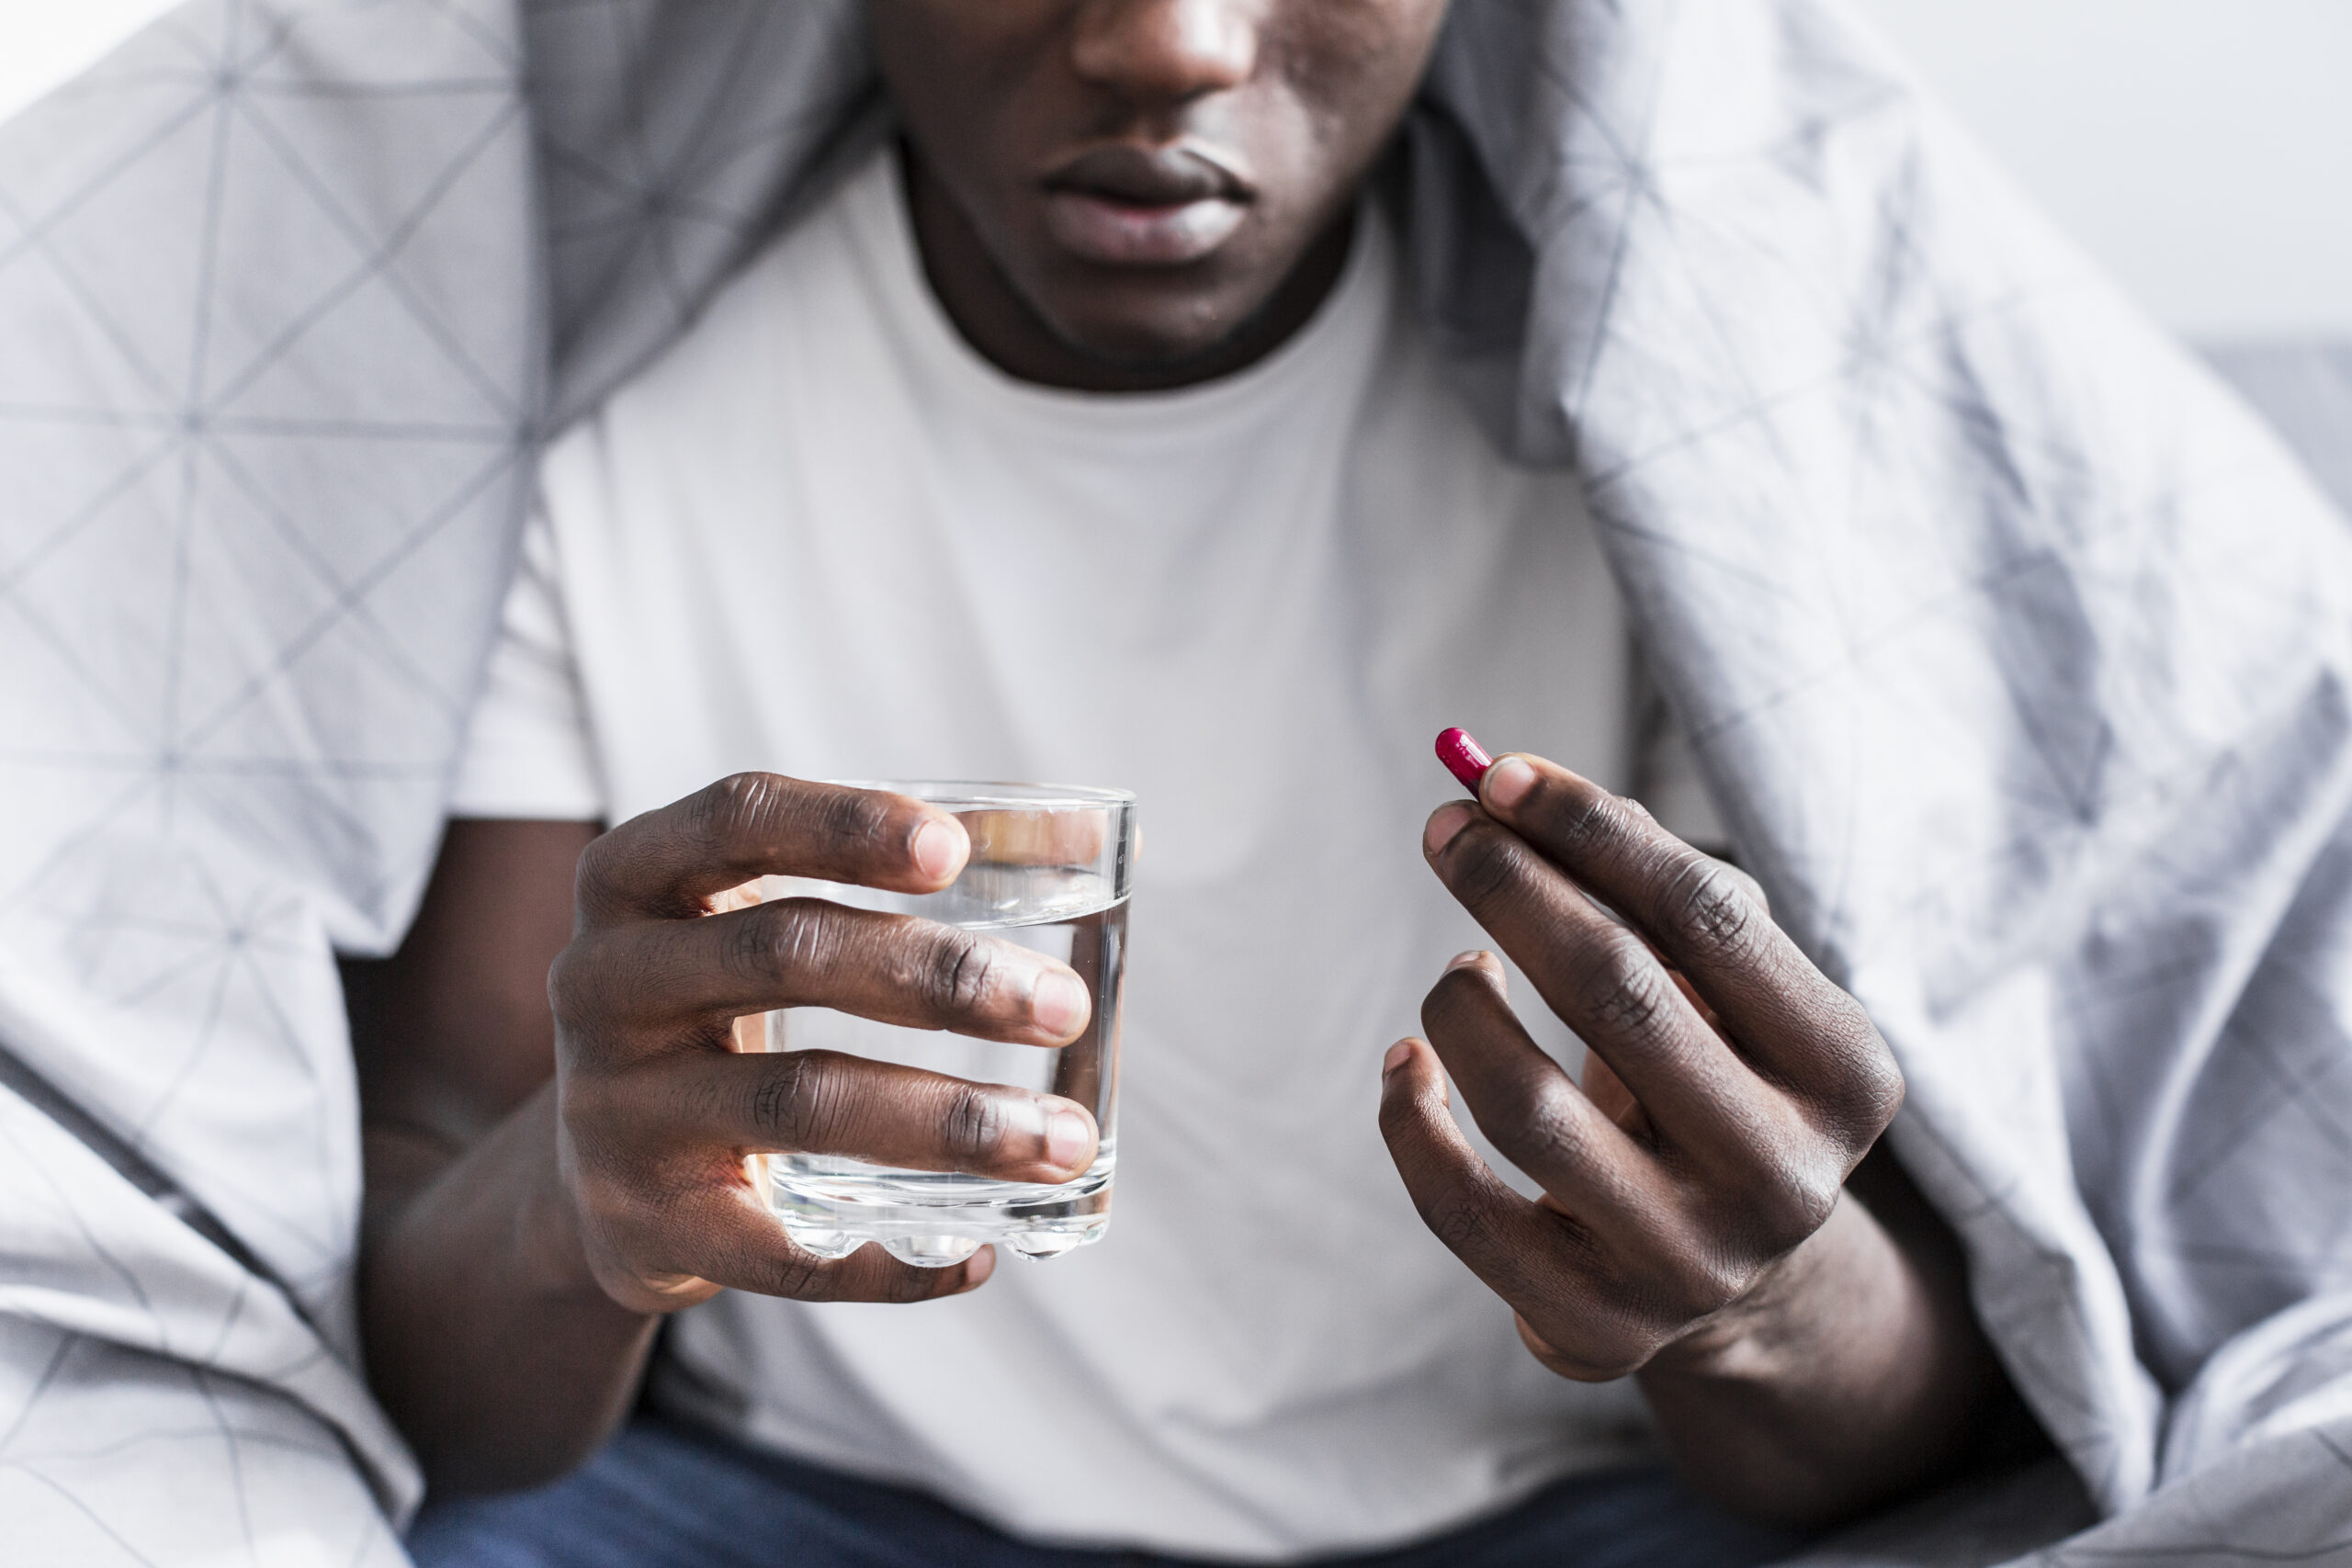 Hydrocodone Abuse and Risks of Addiction